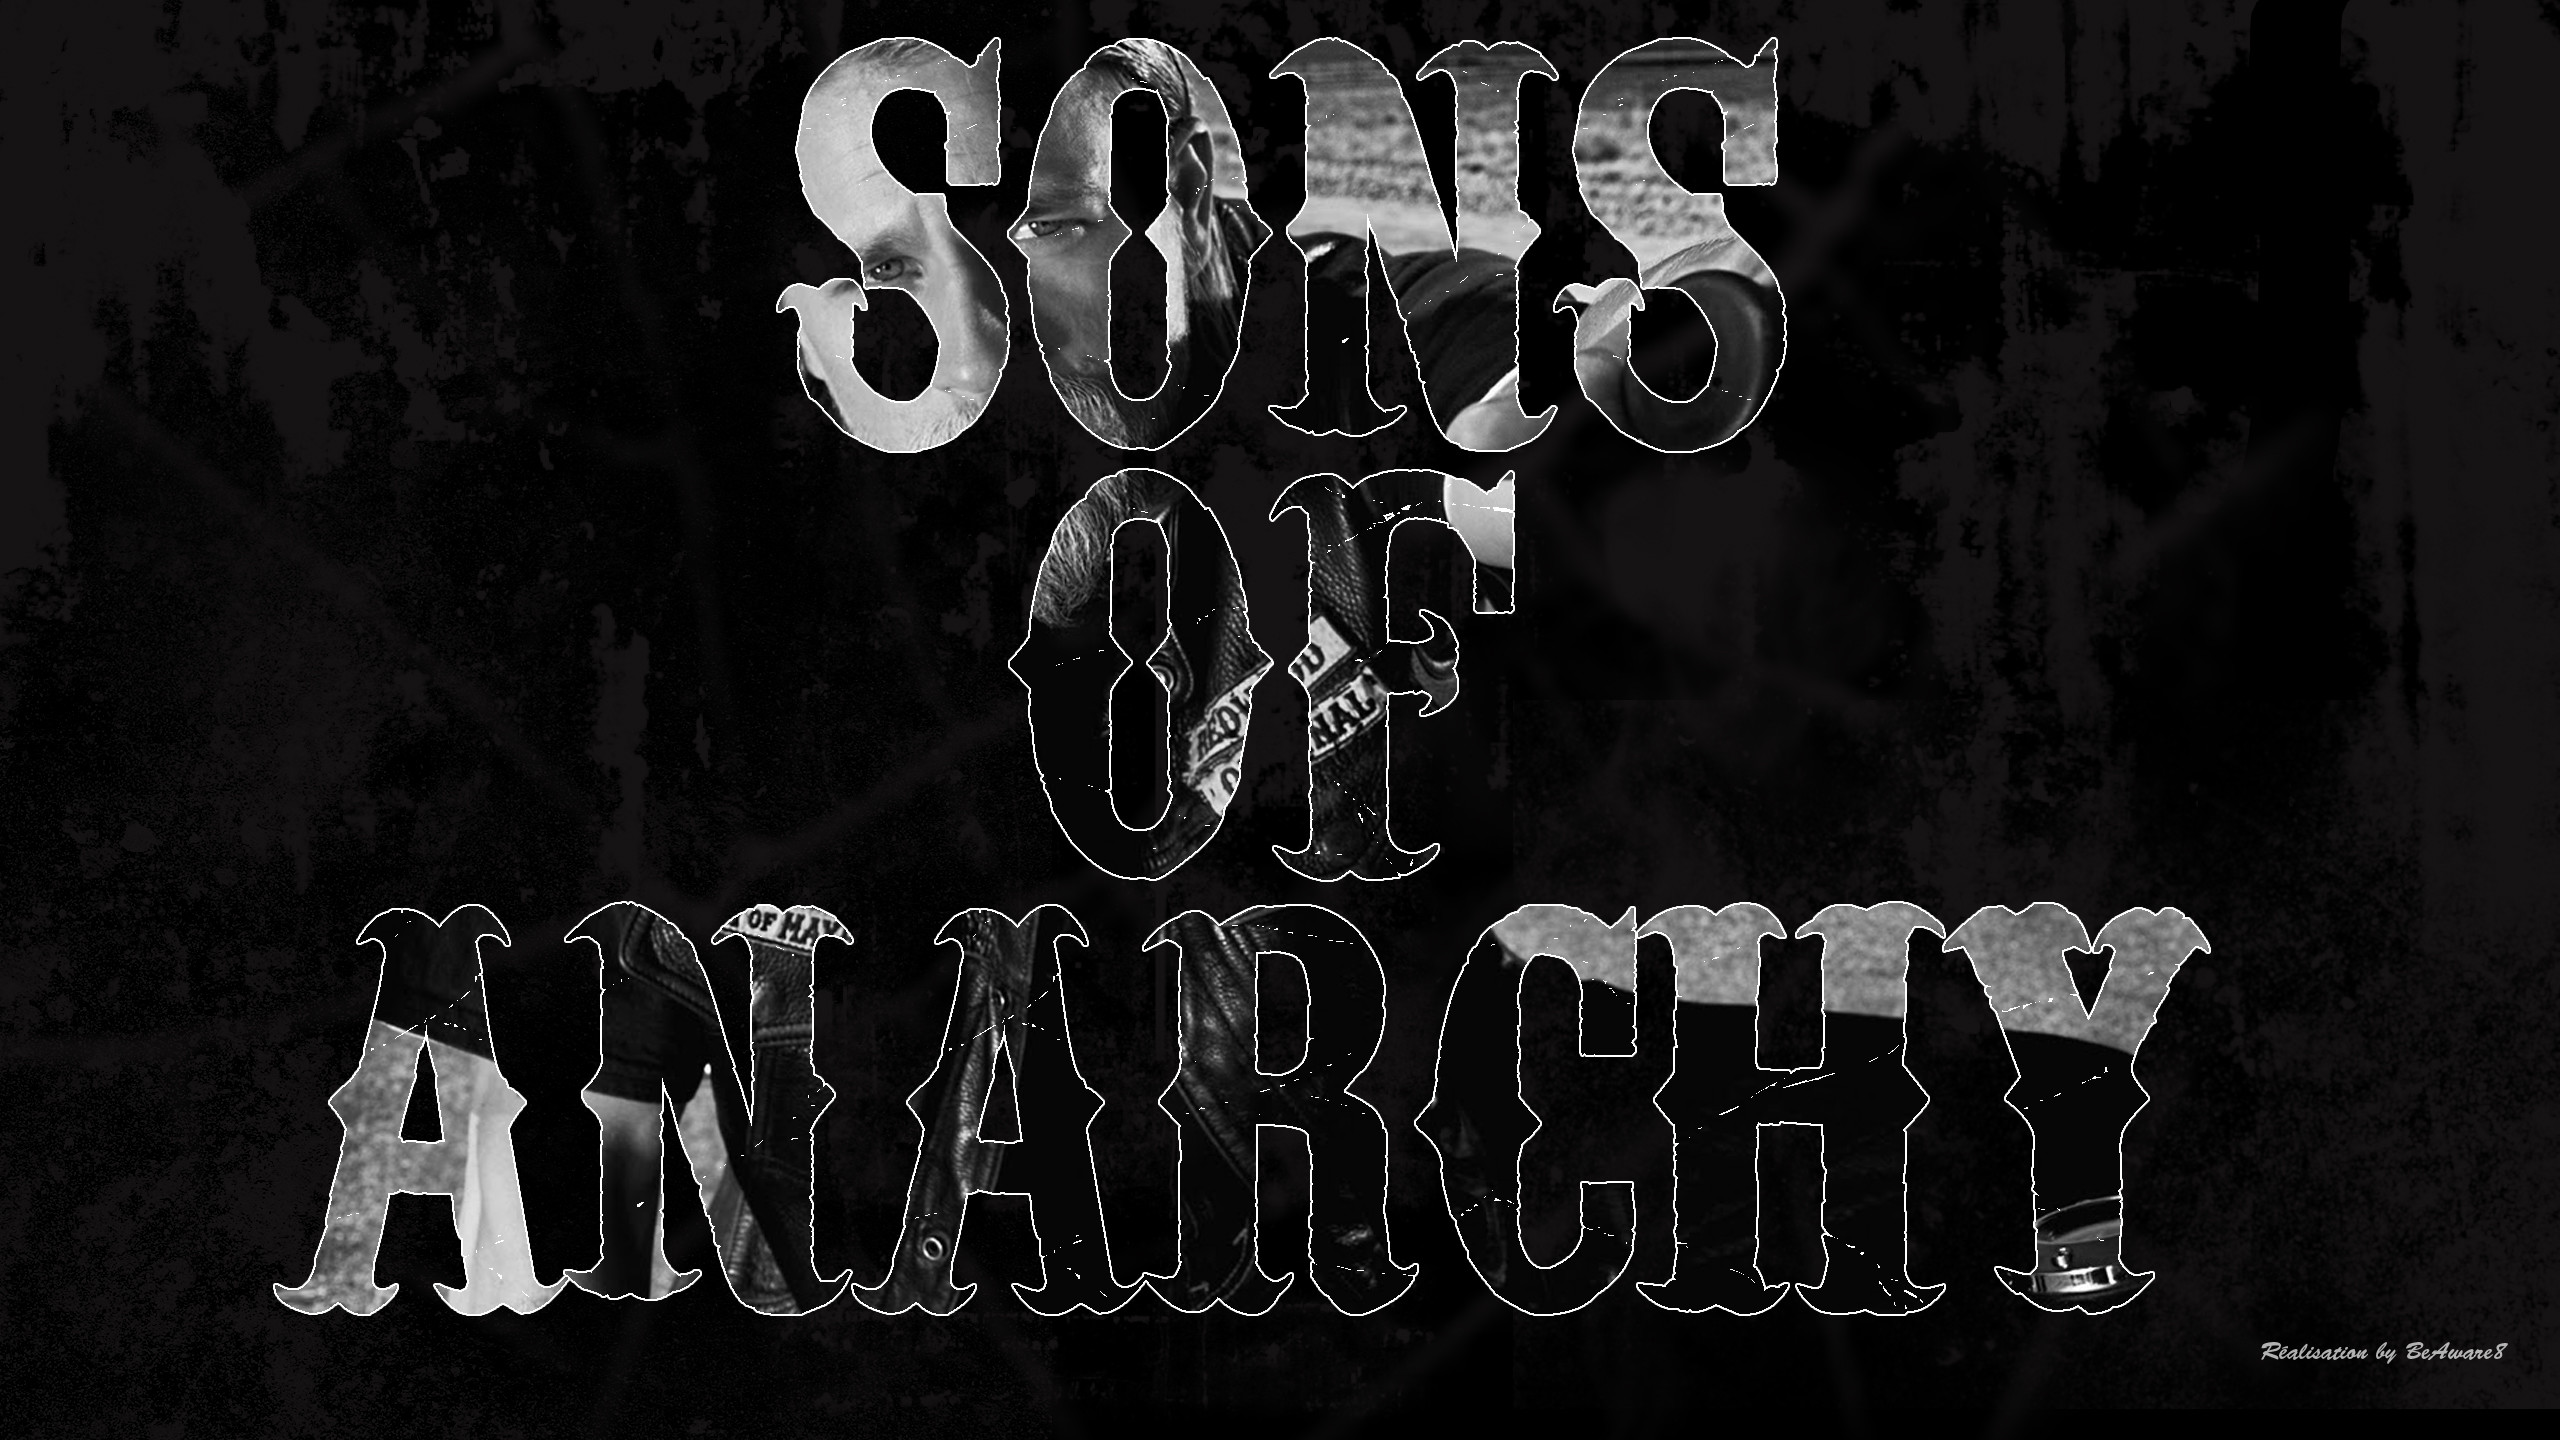 2560x1440 Sons of anarchy typo by BeAware8 Sons of anarchy typo by BeAware8